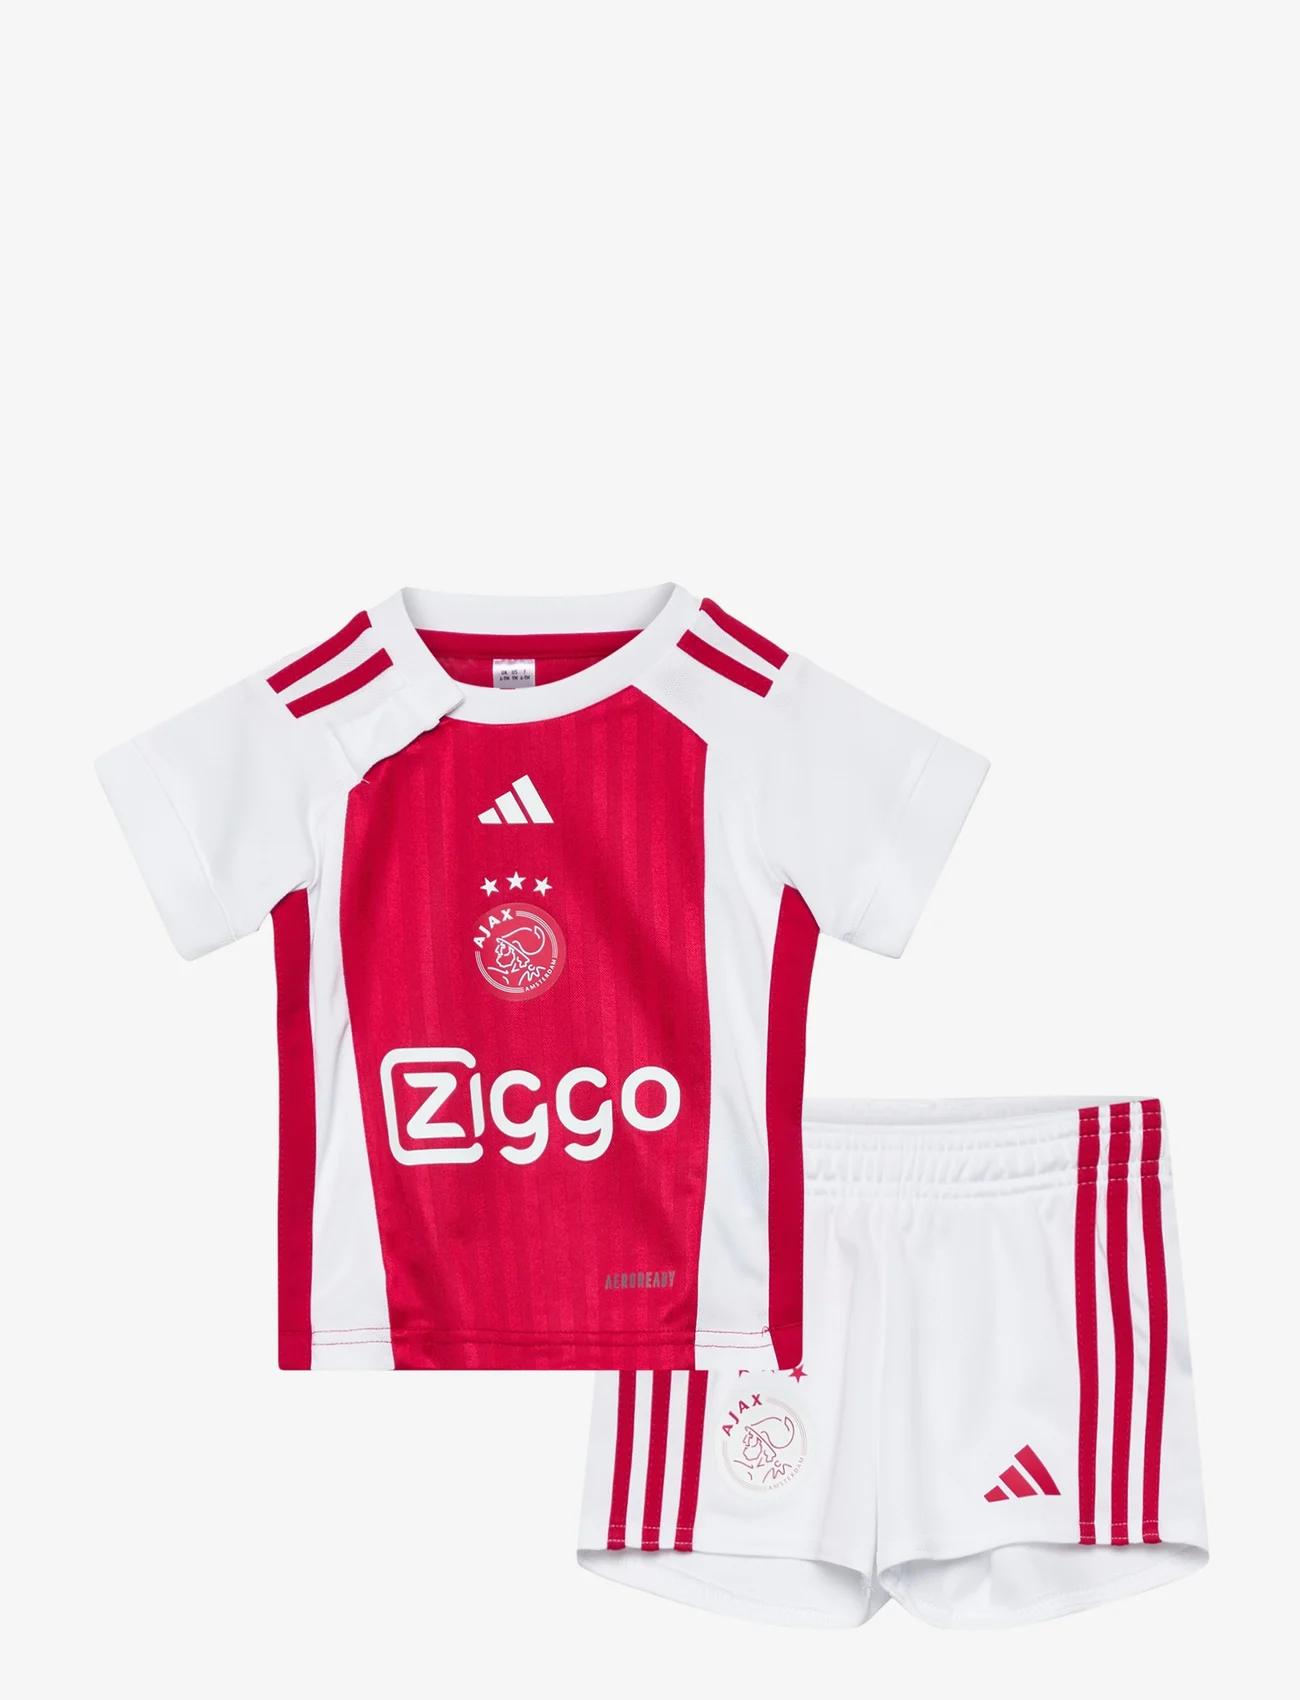 adidas Performance - AJAX H BABY - sets with short-sleeved t-shirt - white/bolred - 0